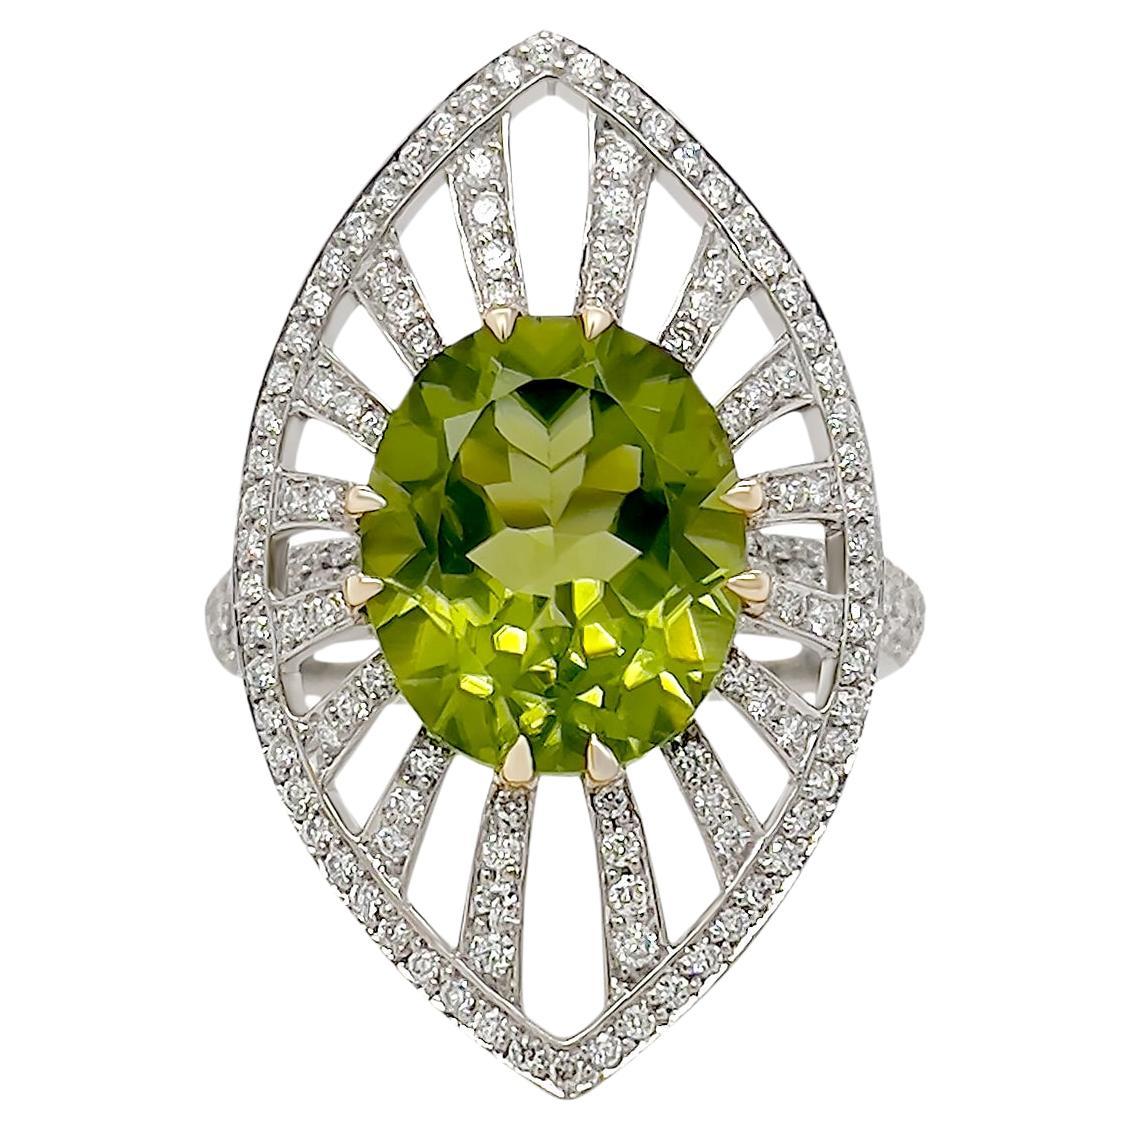 5.15ct Peridot and Diamond Ring in 18K White Gold For Sale